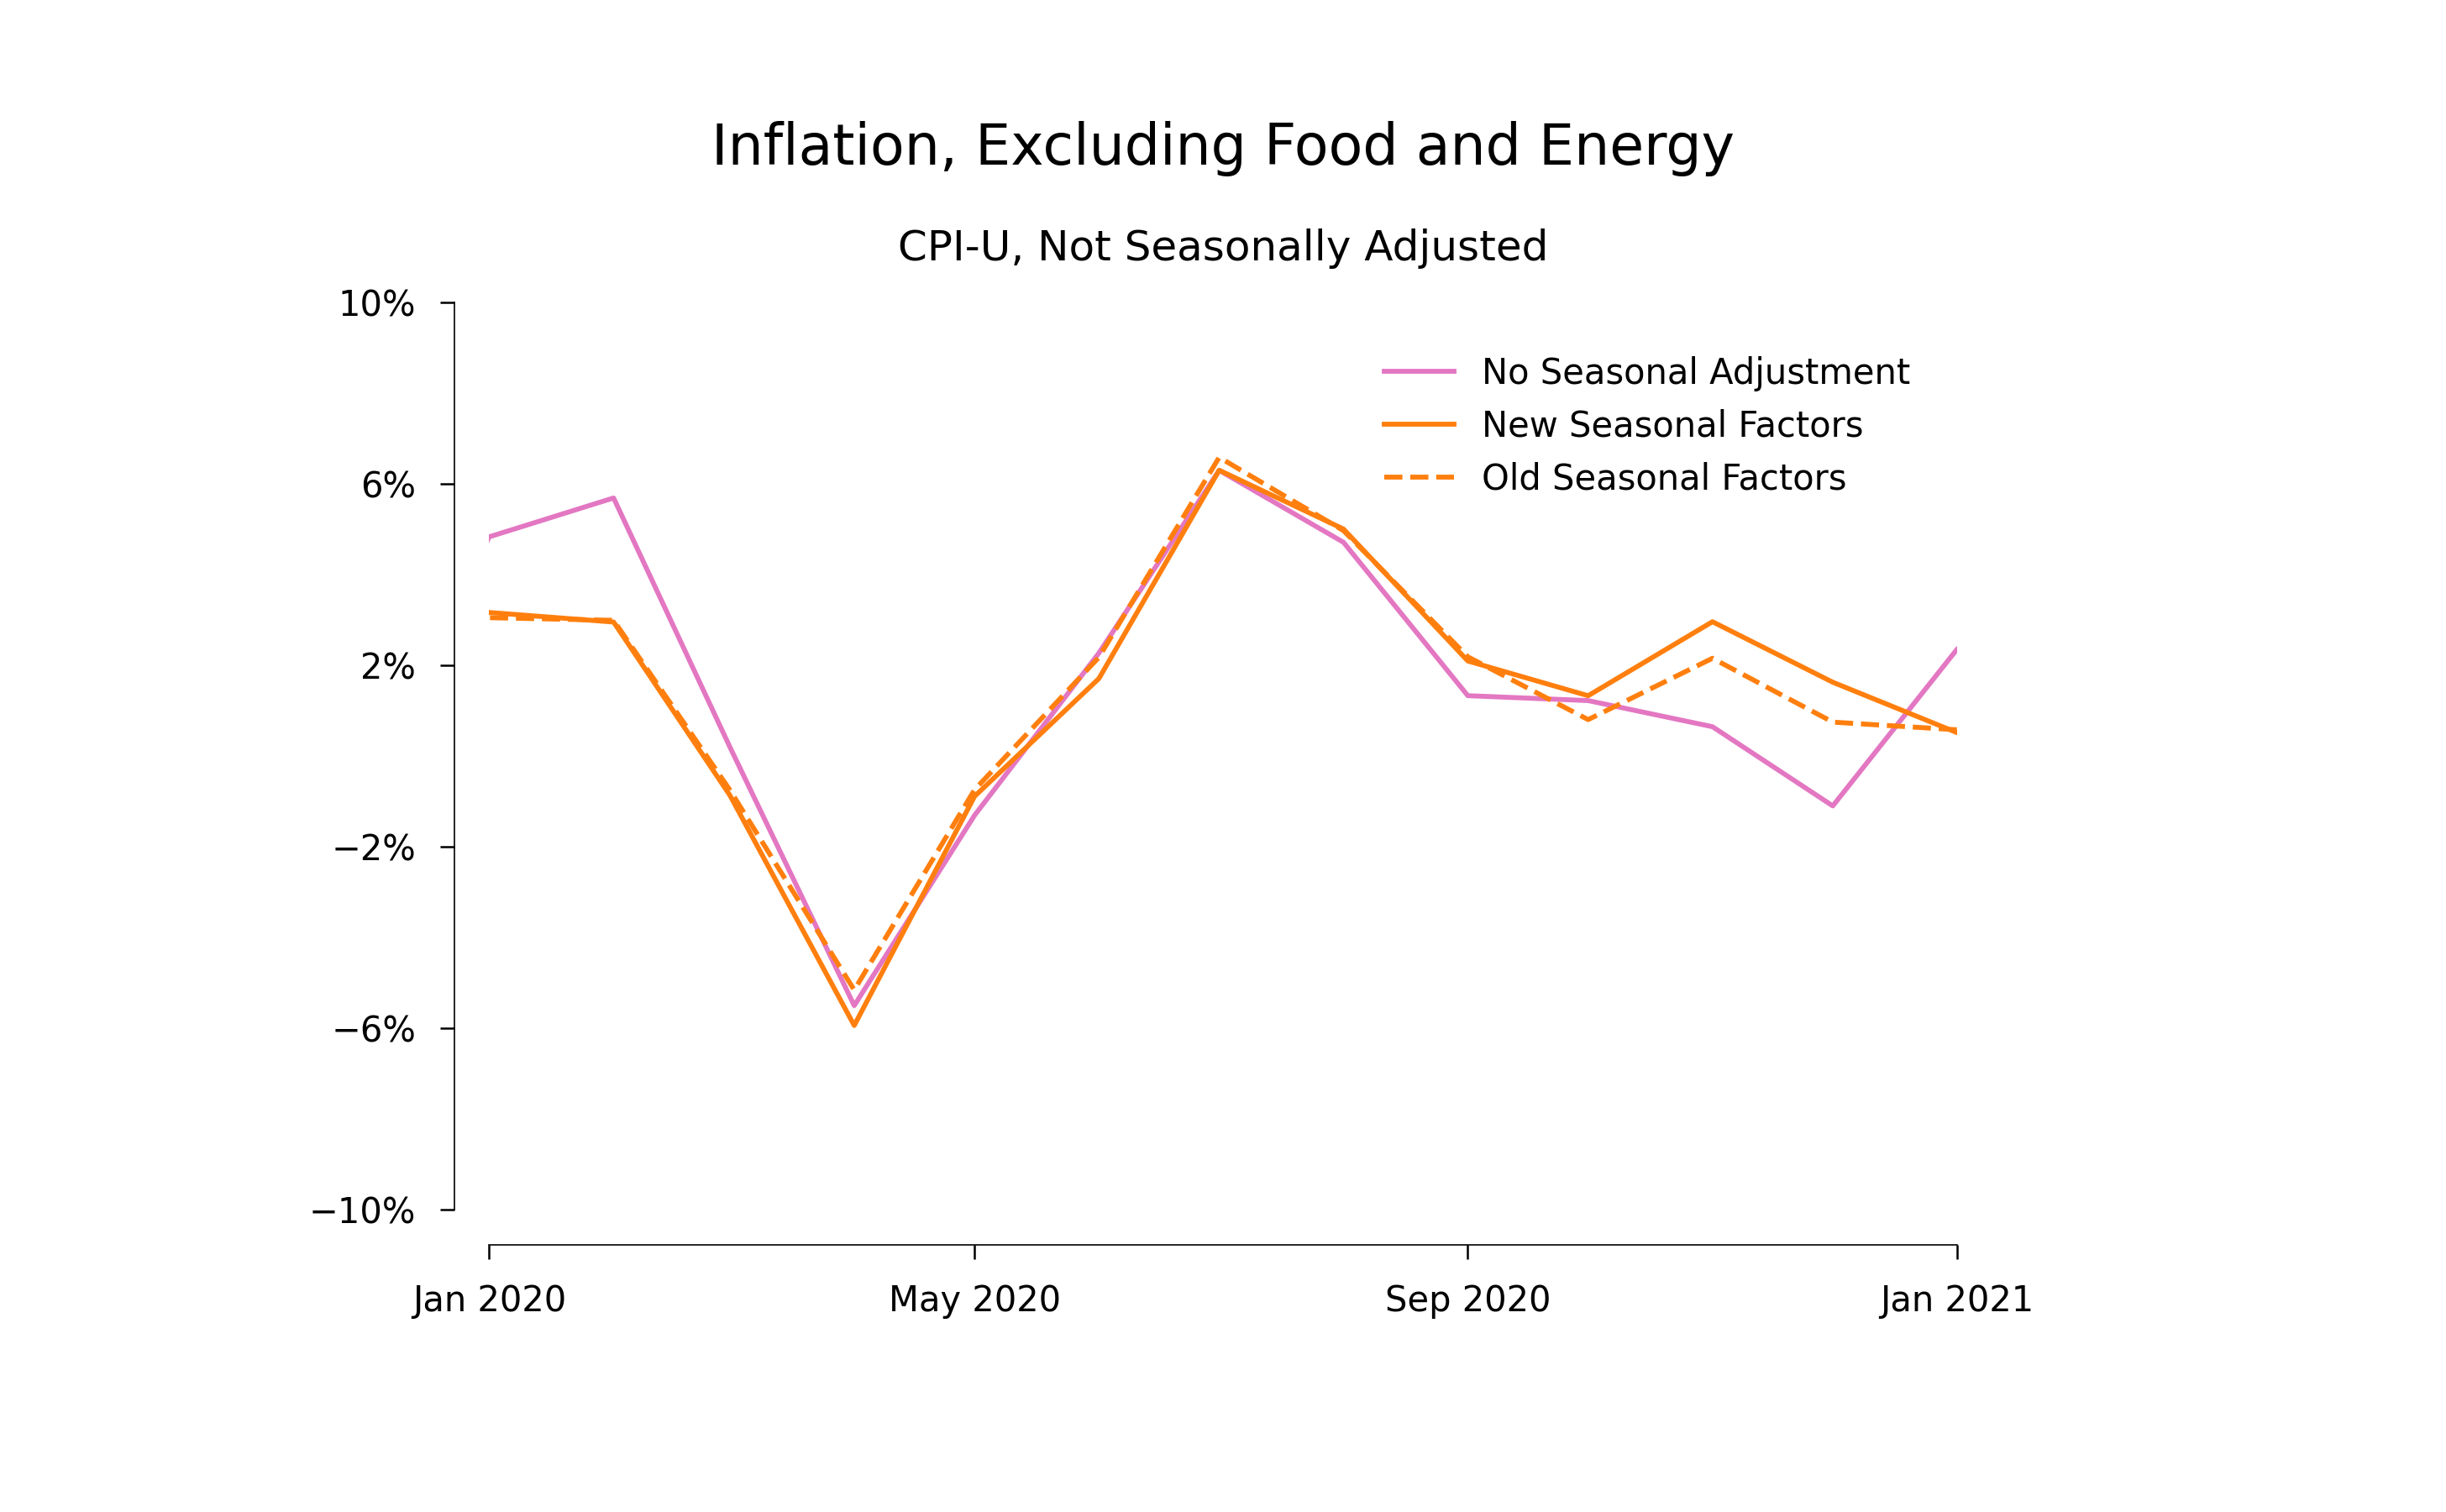 Inflation during 2020, not seasonally adjusted